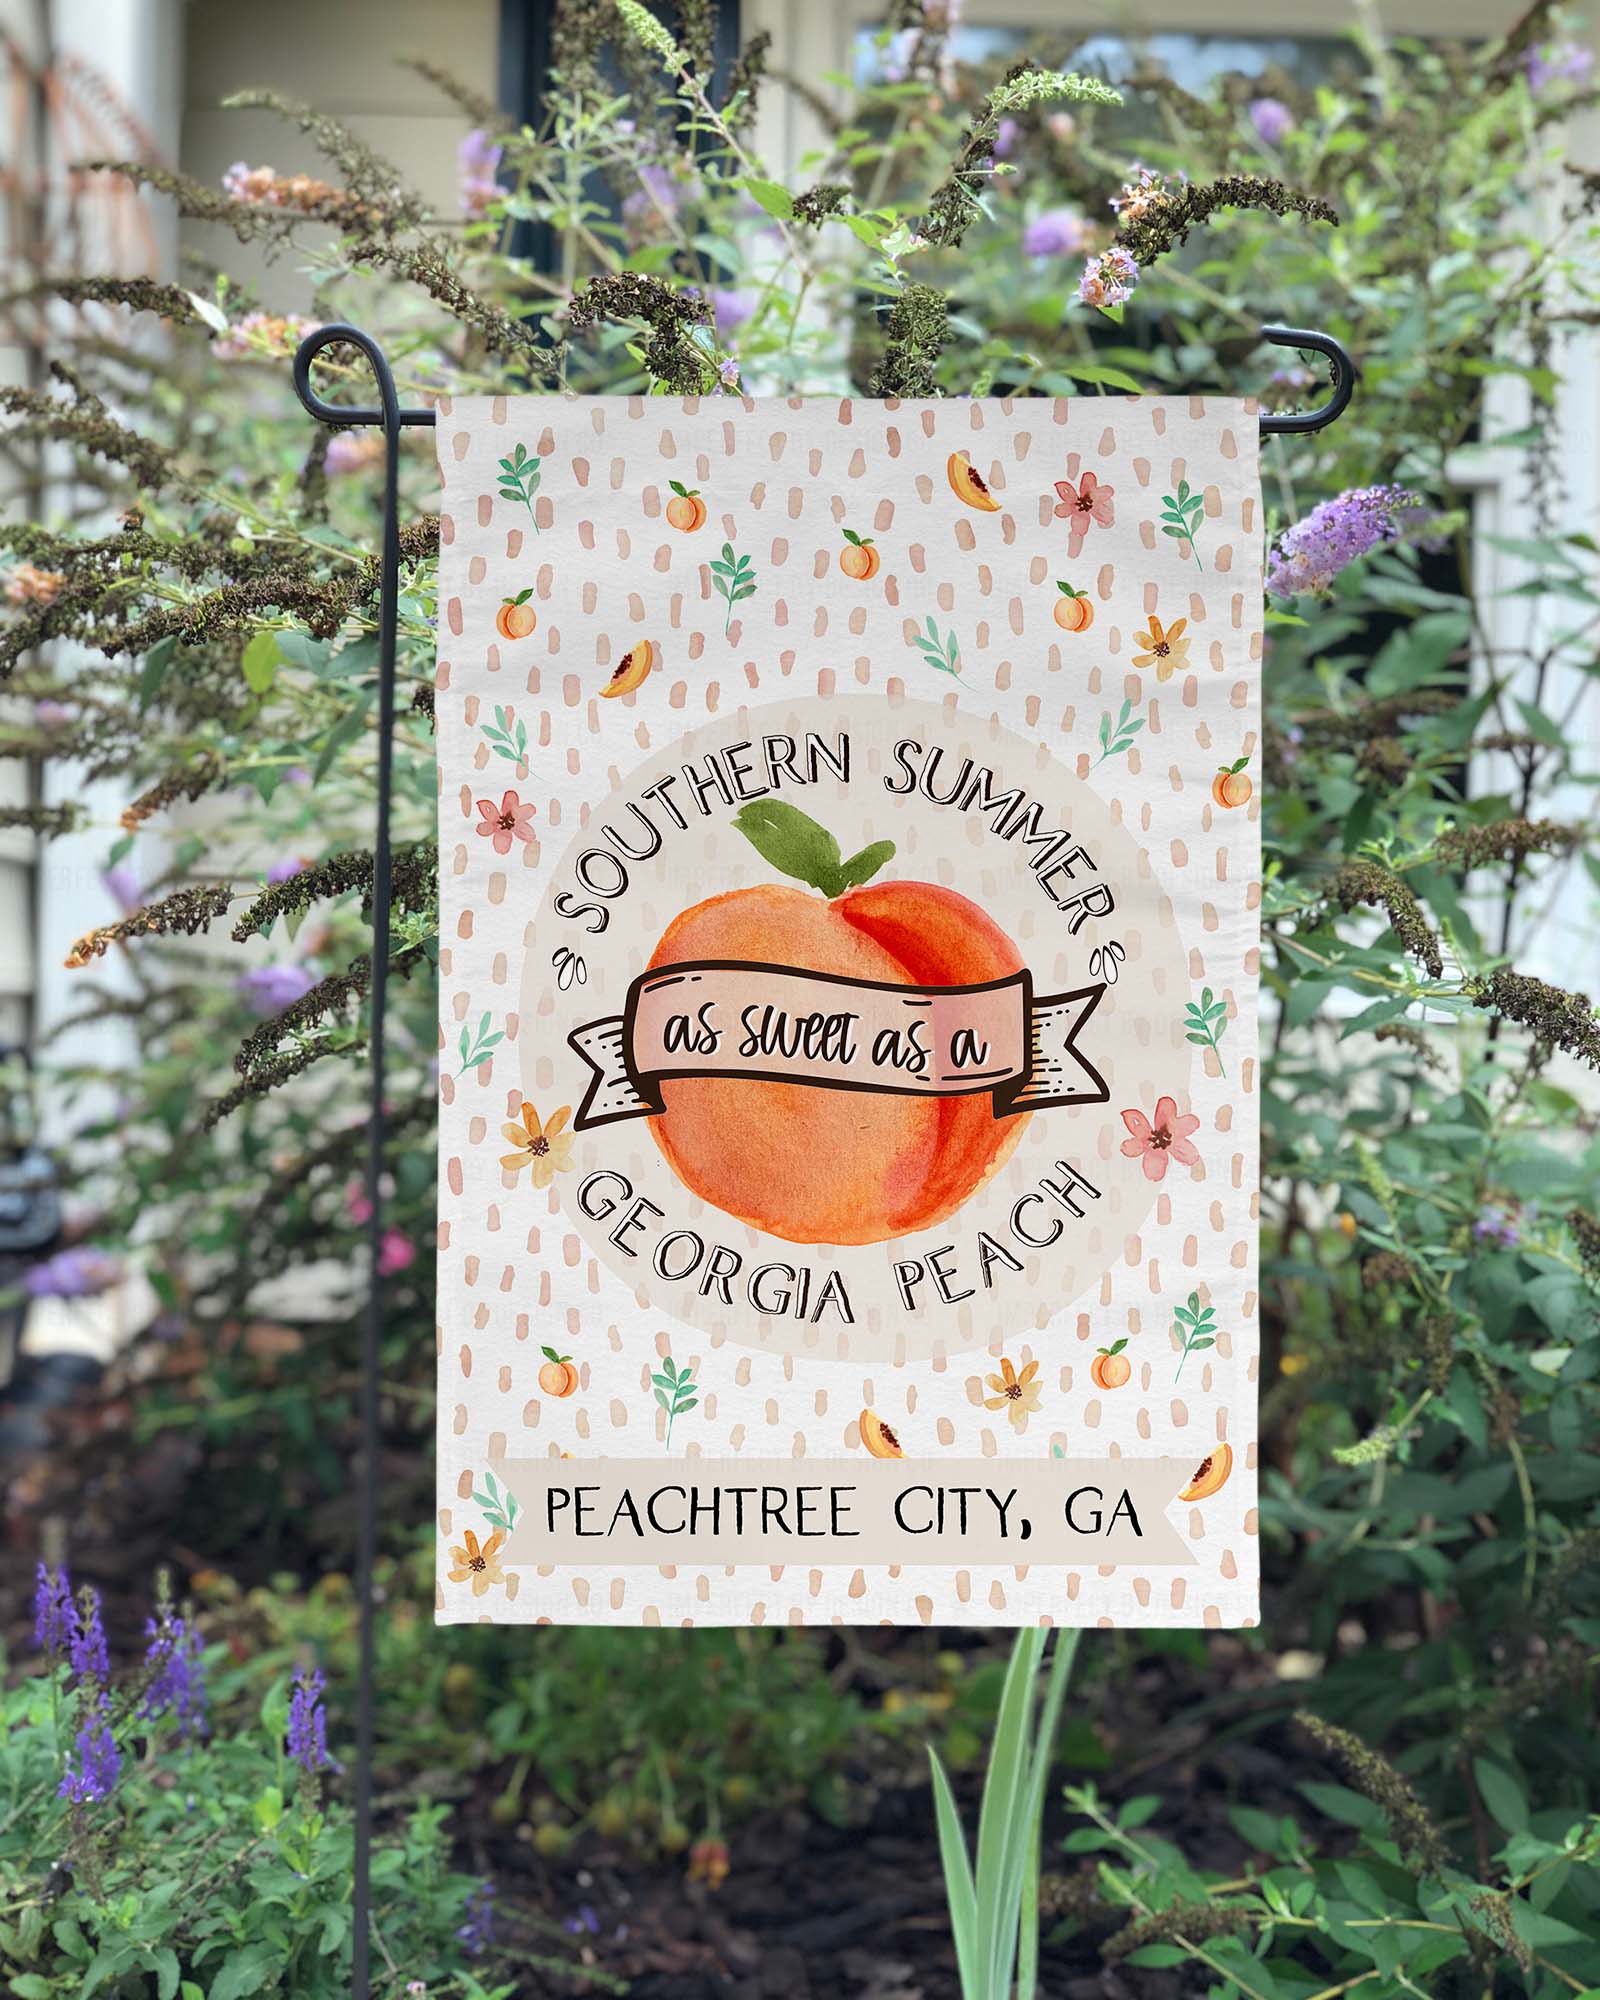 Beautiful Southern Summer - Peach, Peachtree City - Garden Flag featuring a bold and juicy peach with the words 'Southern summer sweet as a Georgia peach'. Crafted from high-quality, weather-resistant material. Must-have addition to your outdoor decor! - Hometown Pride Collection | imperfect by design co